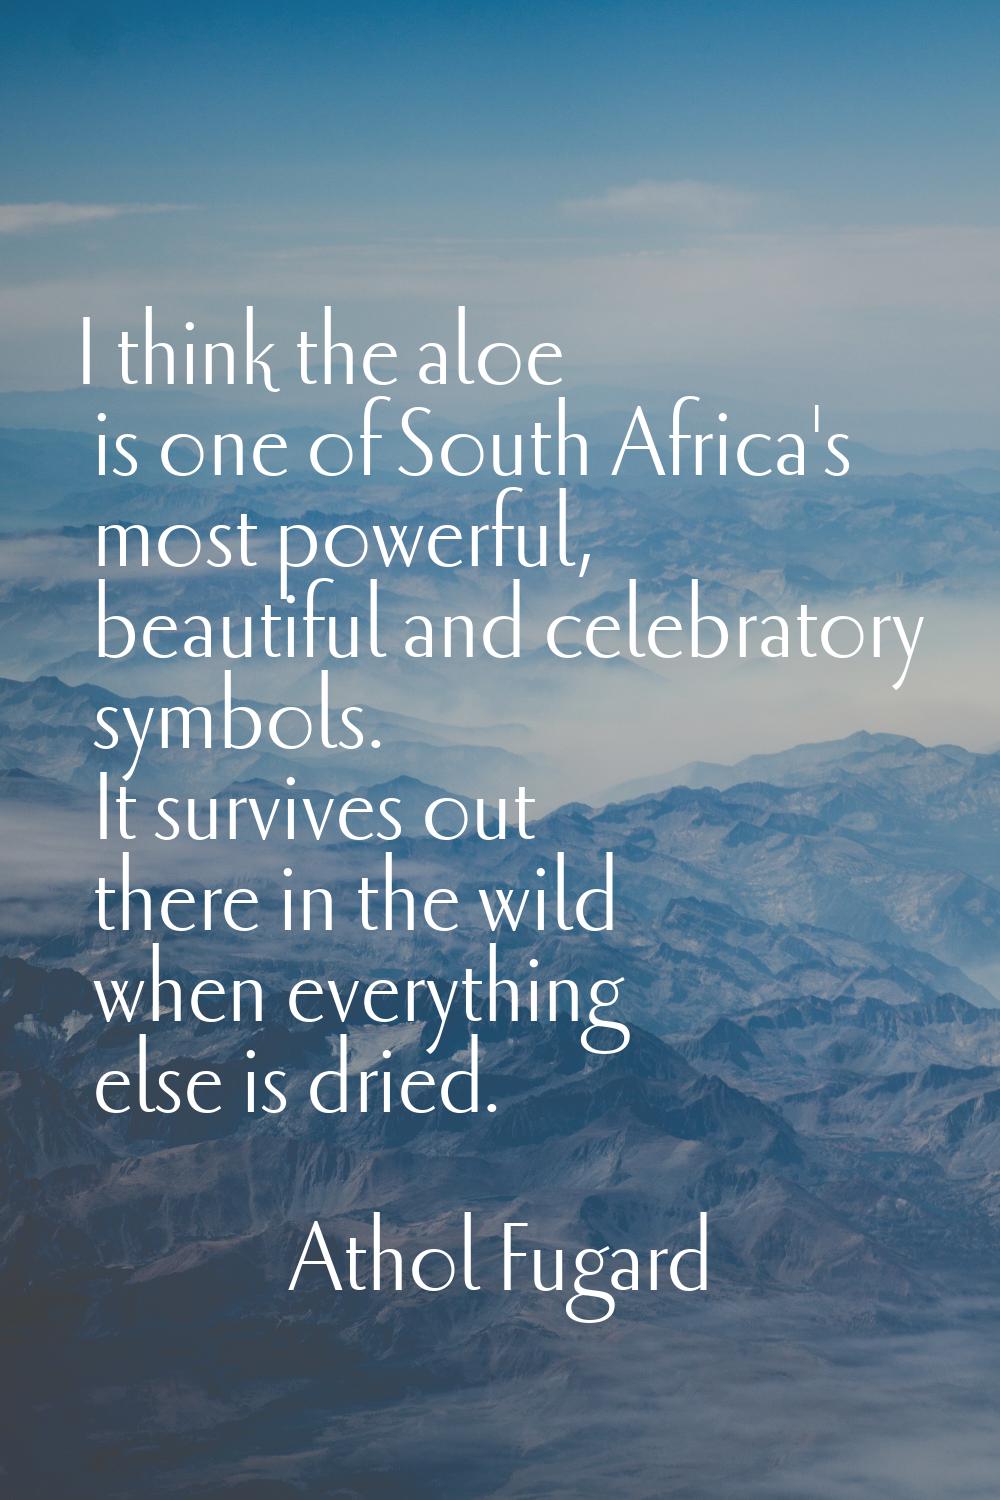 I think the aloe is one of South Africa's most powerful, beautiful and celebratory symbols. It surv